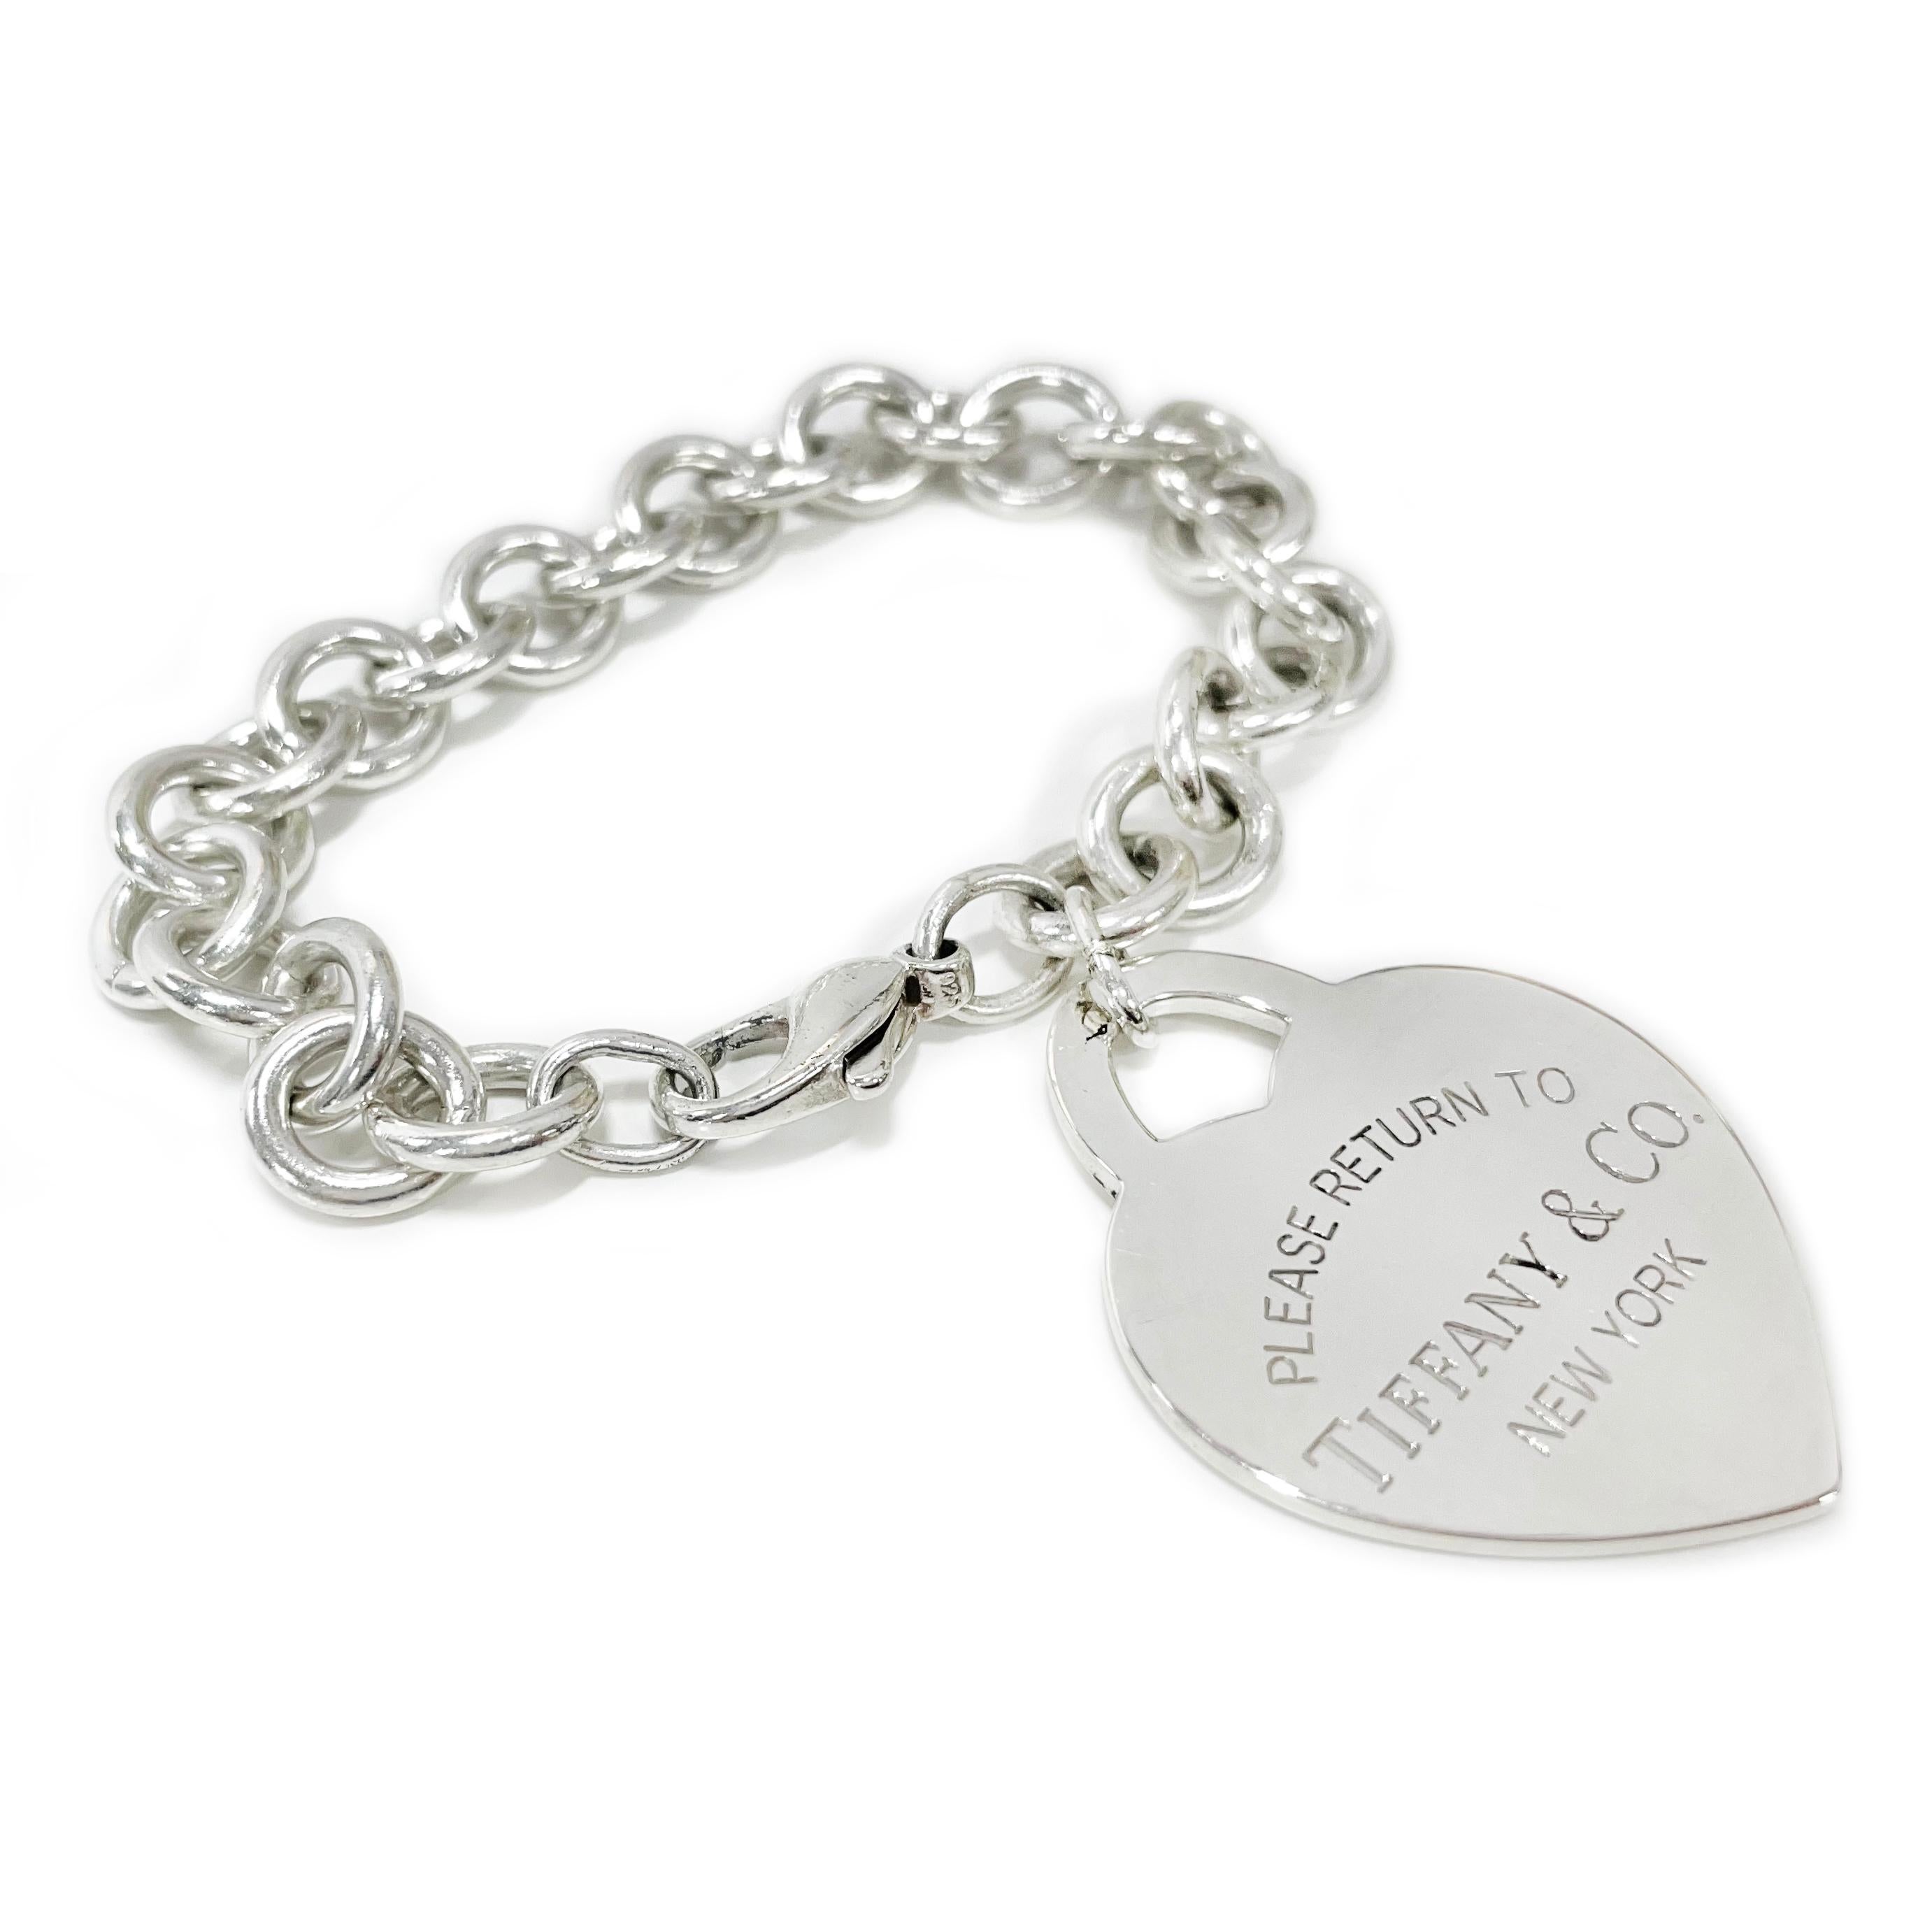 Tiffany & Co. Large Sterling Silver Heart Bracelet. The classic bracelet features a heavyweight link chain with a signature Tiffany heart pendant/charm and lobster clasp closure. Stamped on the front of the heart pendant is Please Return to Tiffany